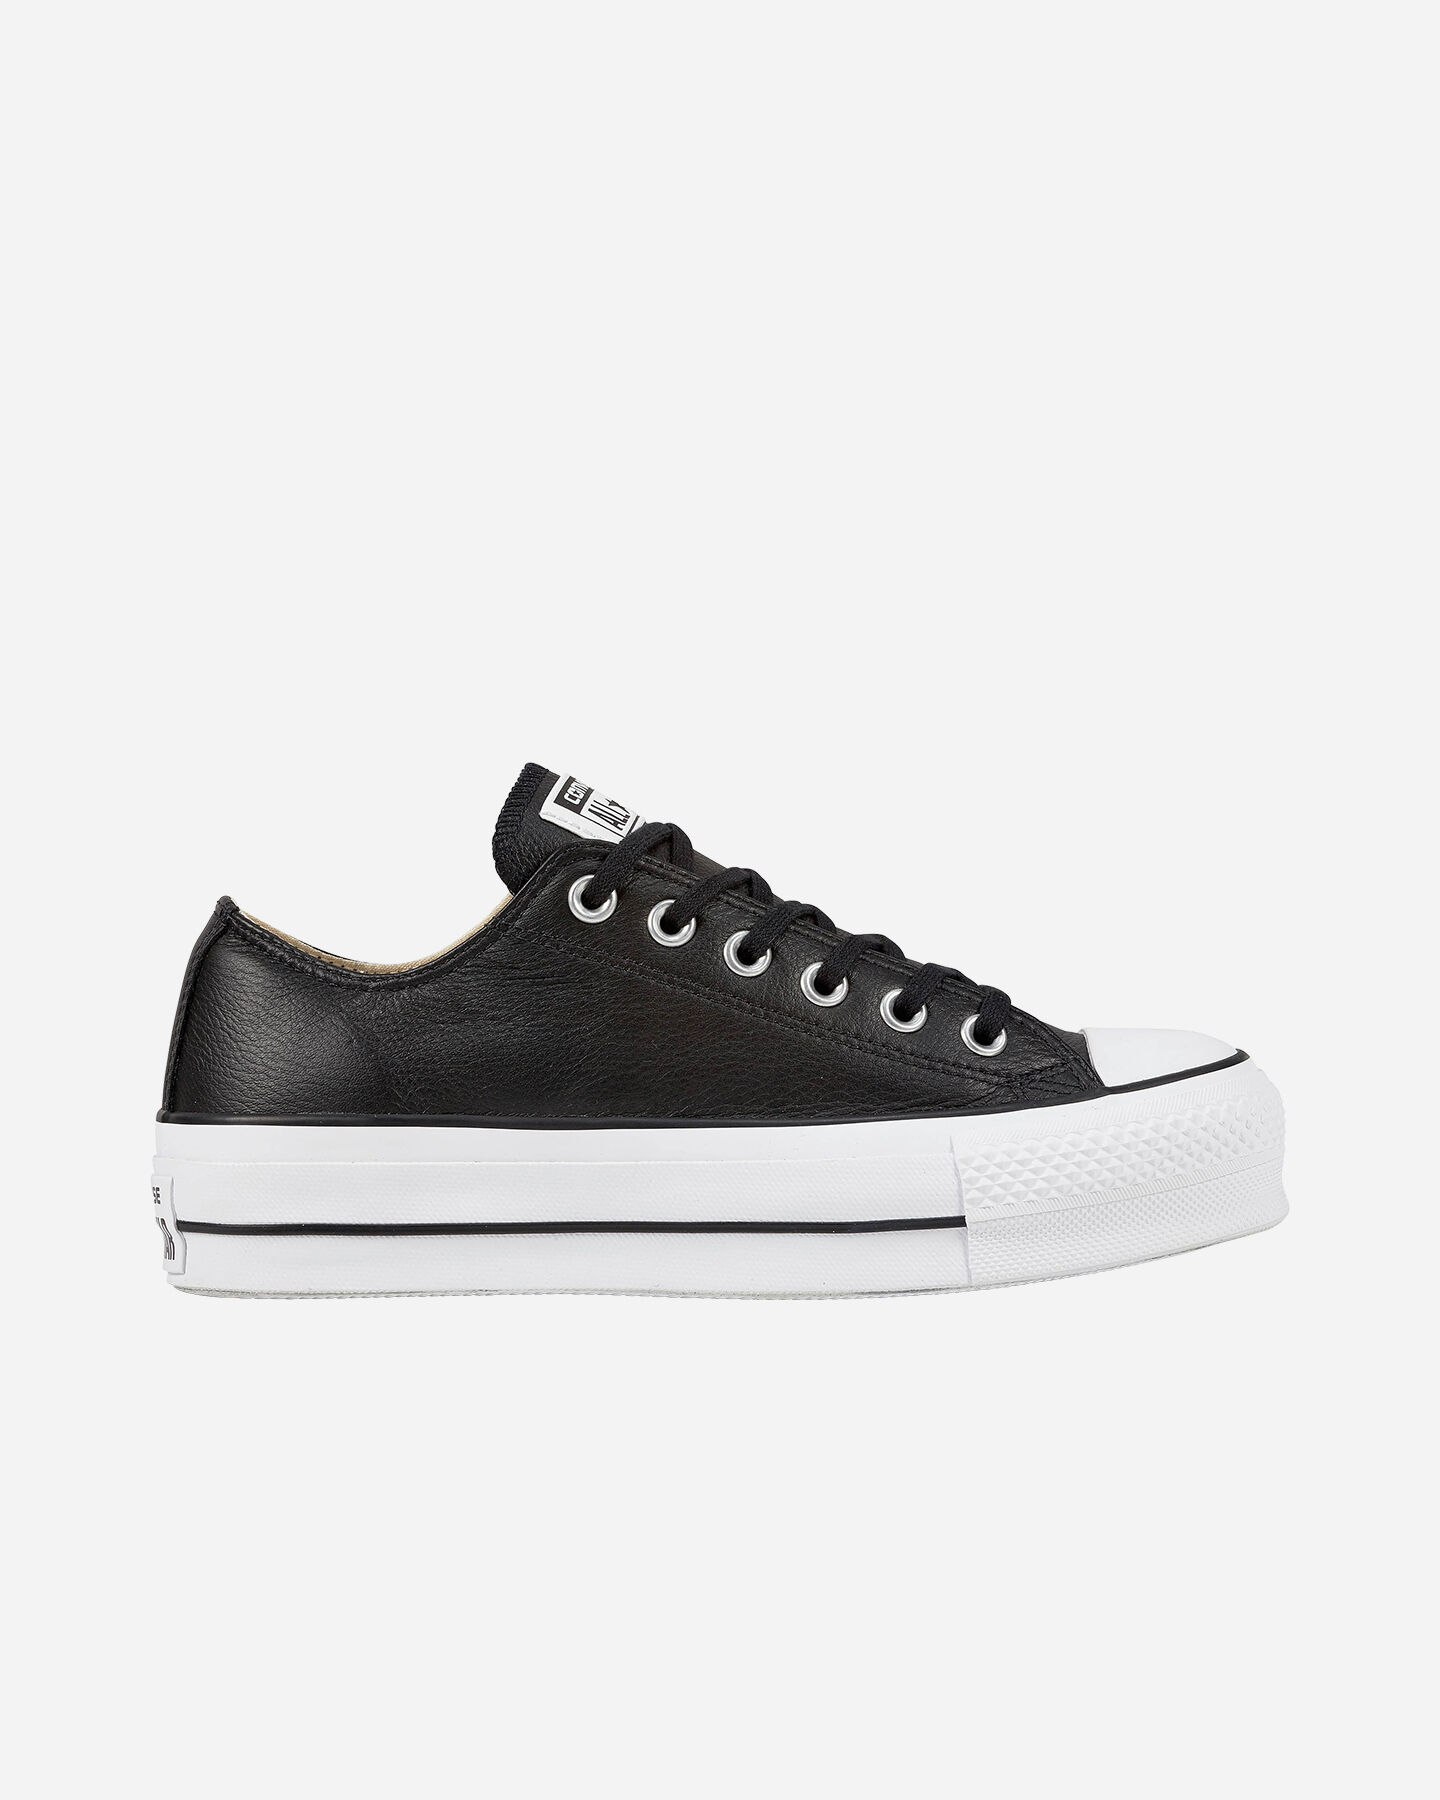  Scarpe sneakers CONVERSE ALL STAR PLATFORM LEATHER OX W S4051916|1|10,5 scatto 0